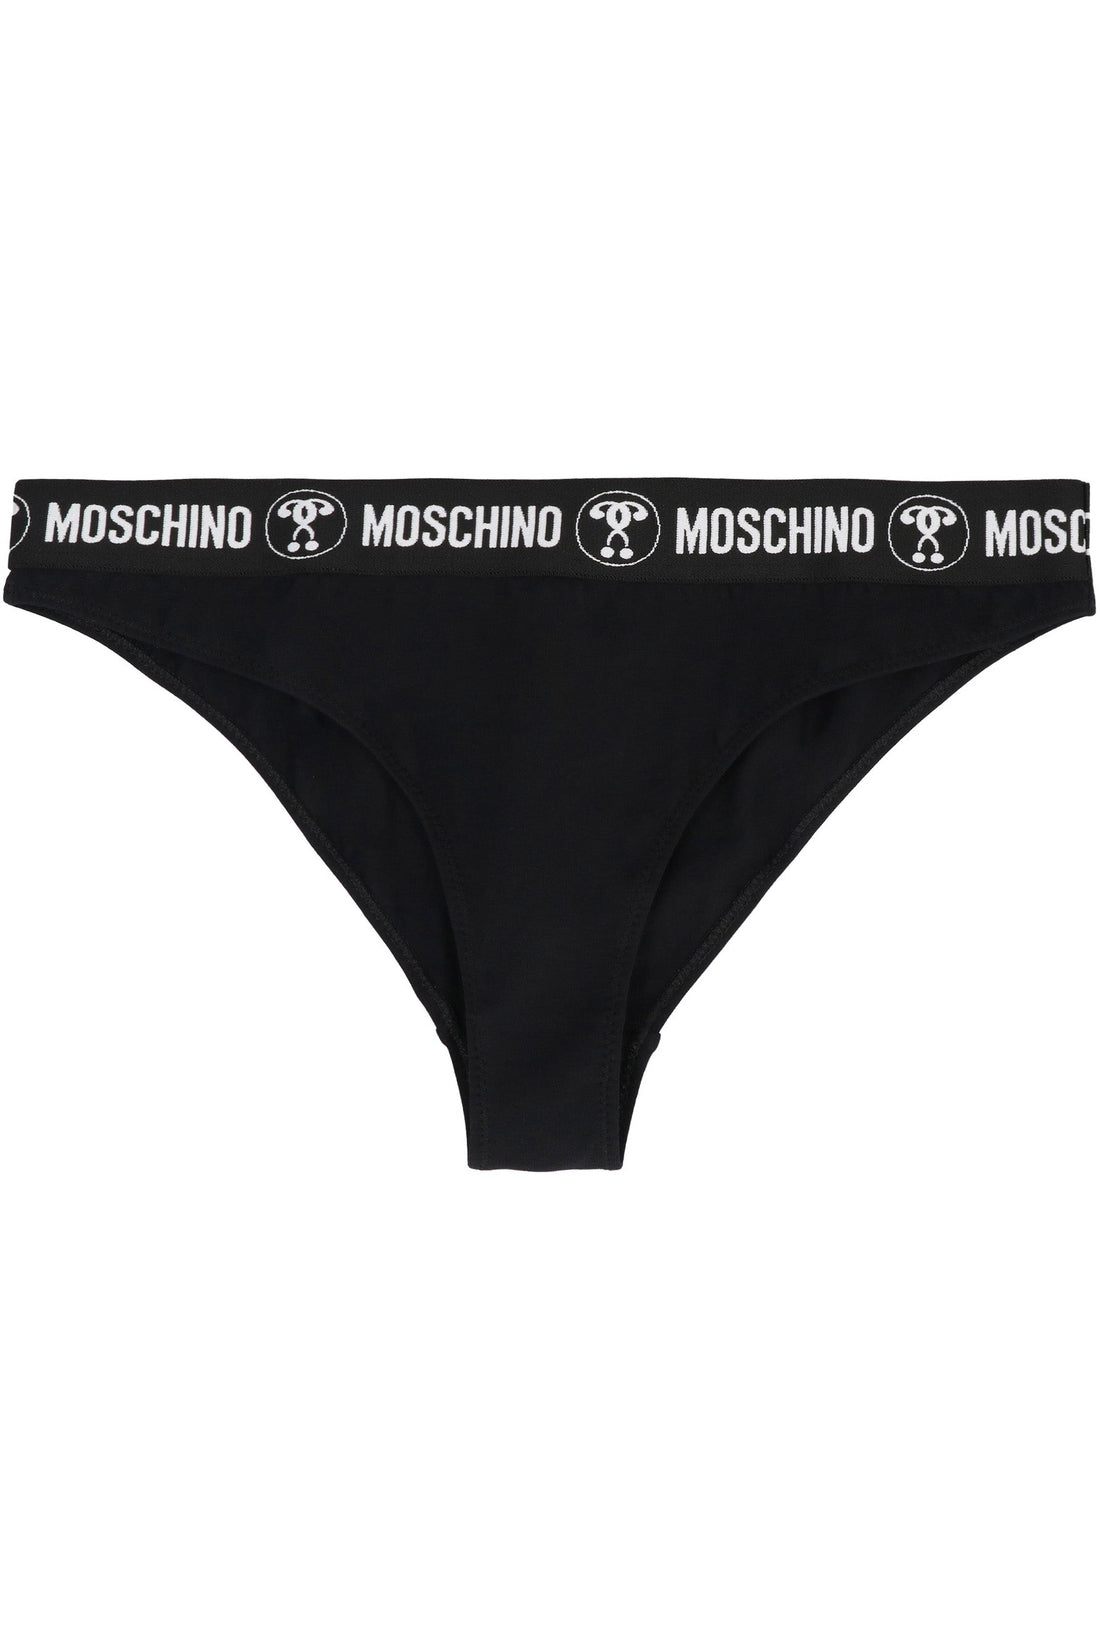 Moschino-OUTLET-SALE-Cotton briefs with elastic band-ARCHIVIST